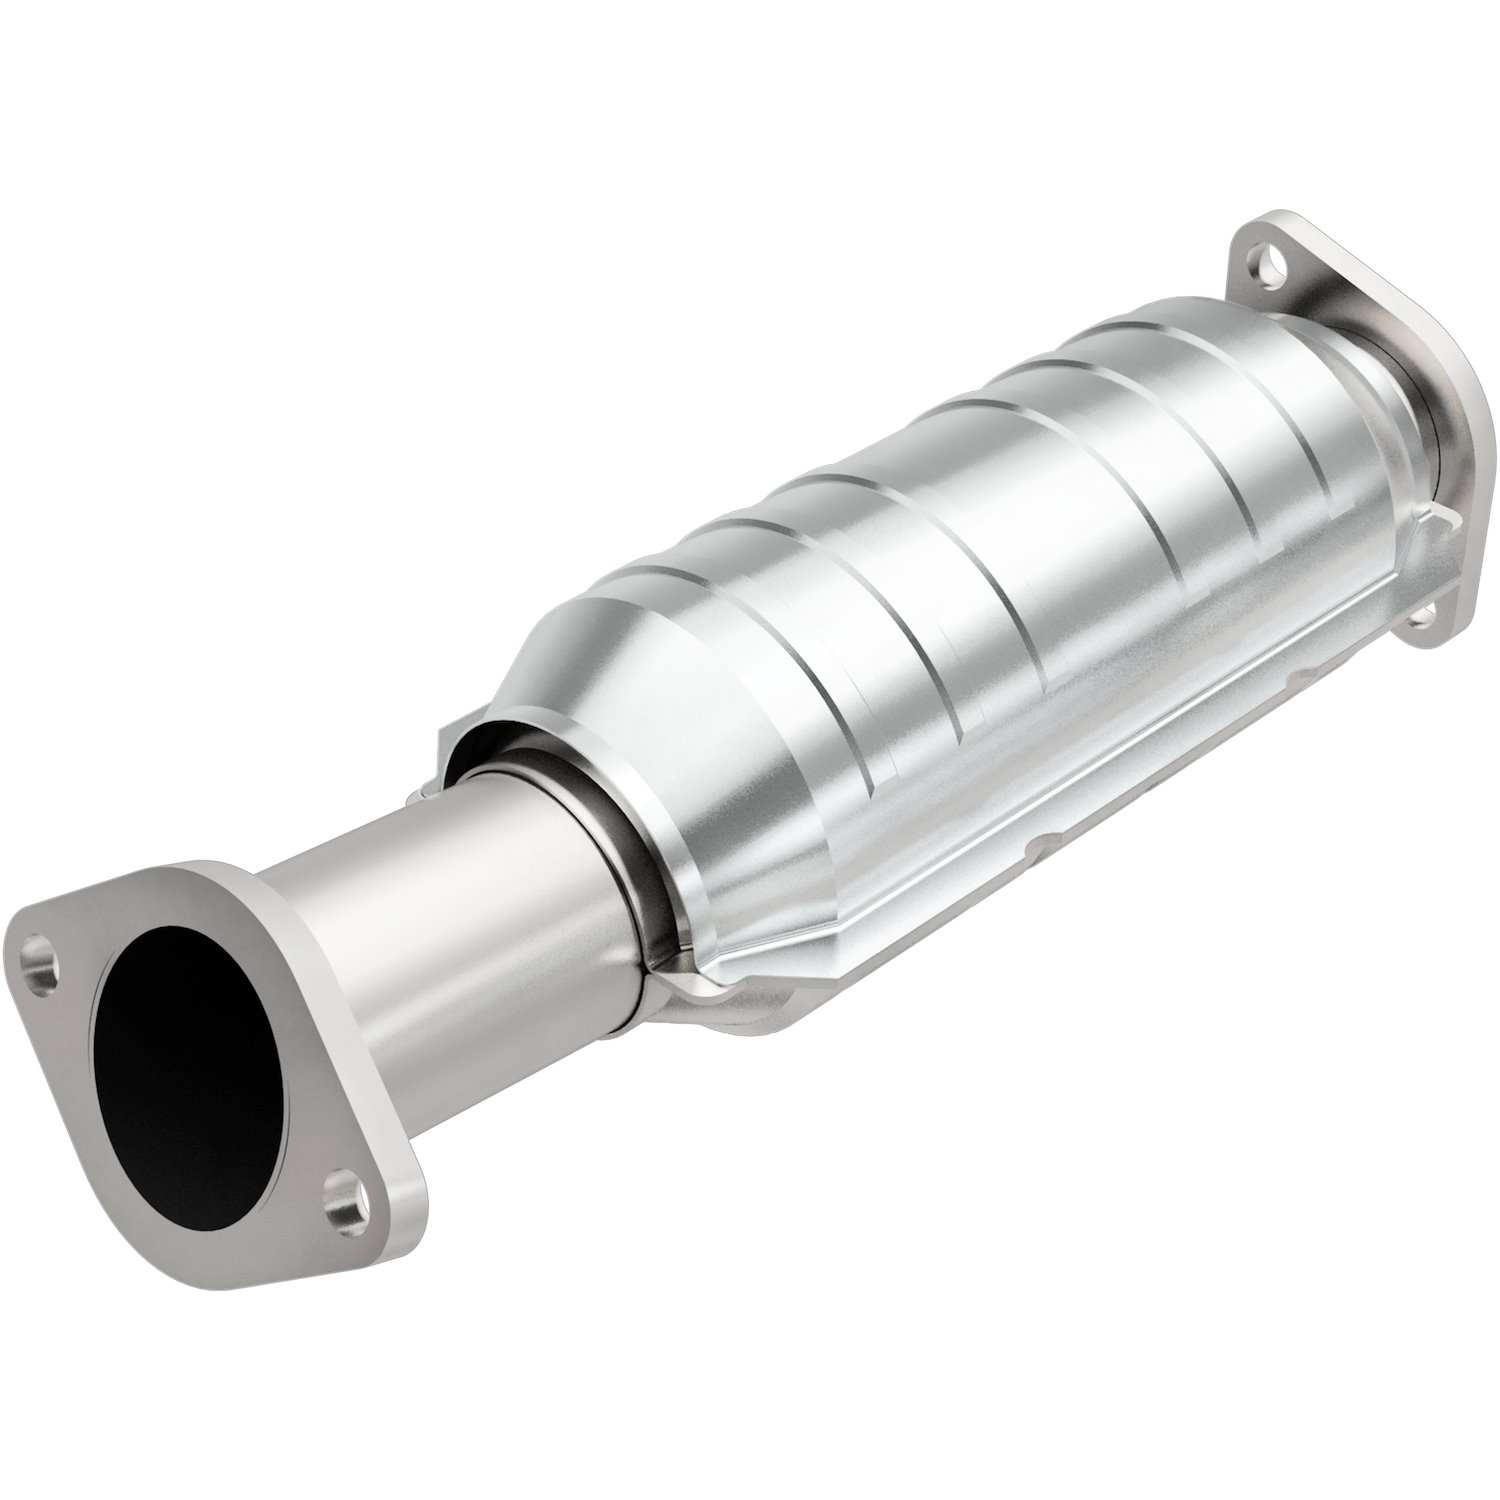 OEM Grade Federal / EPA Compliant Direct-Fit Catalytic Converter 49811